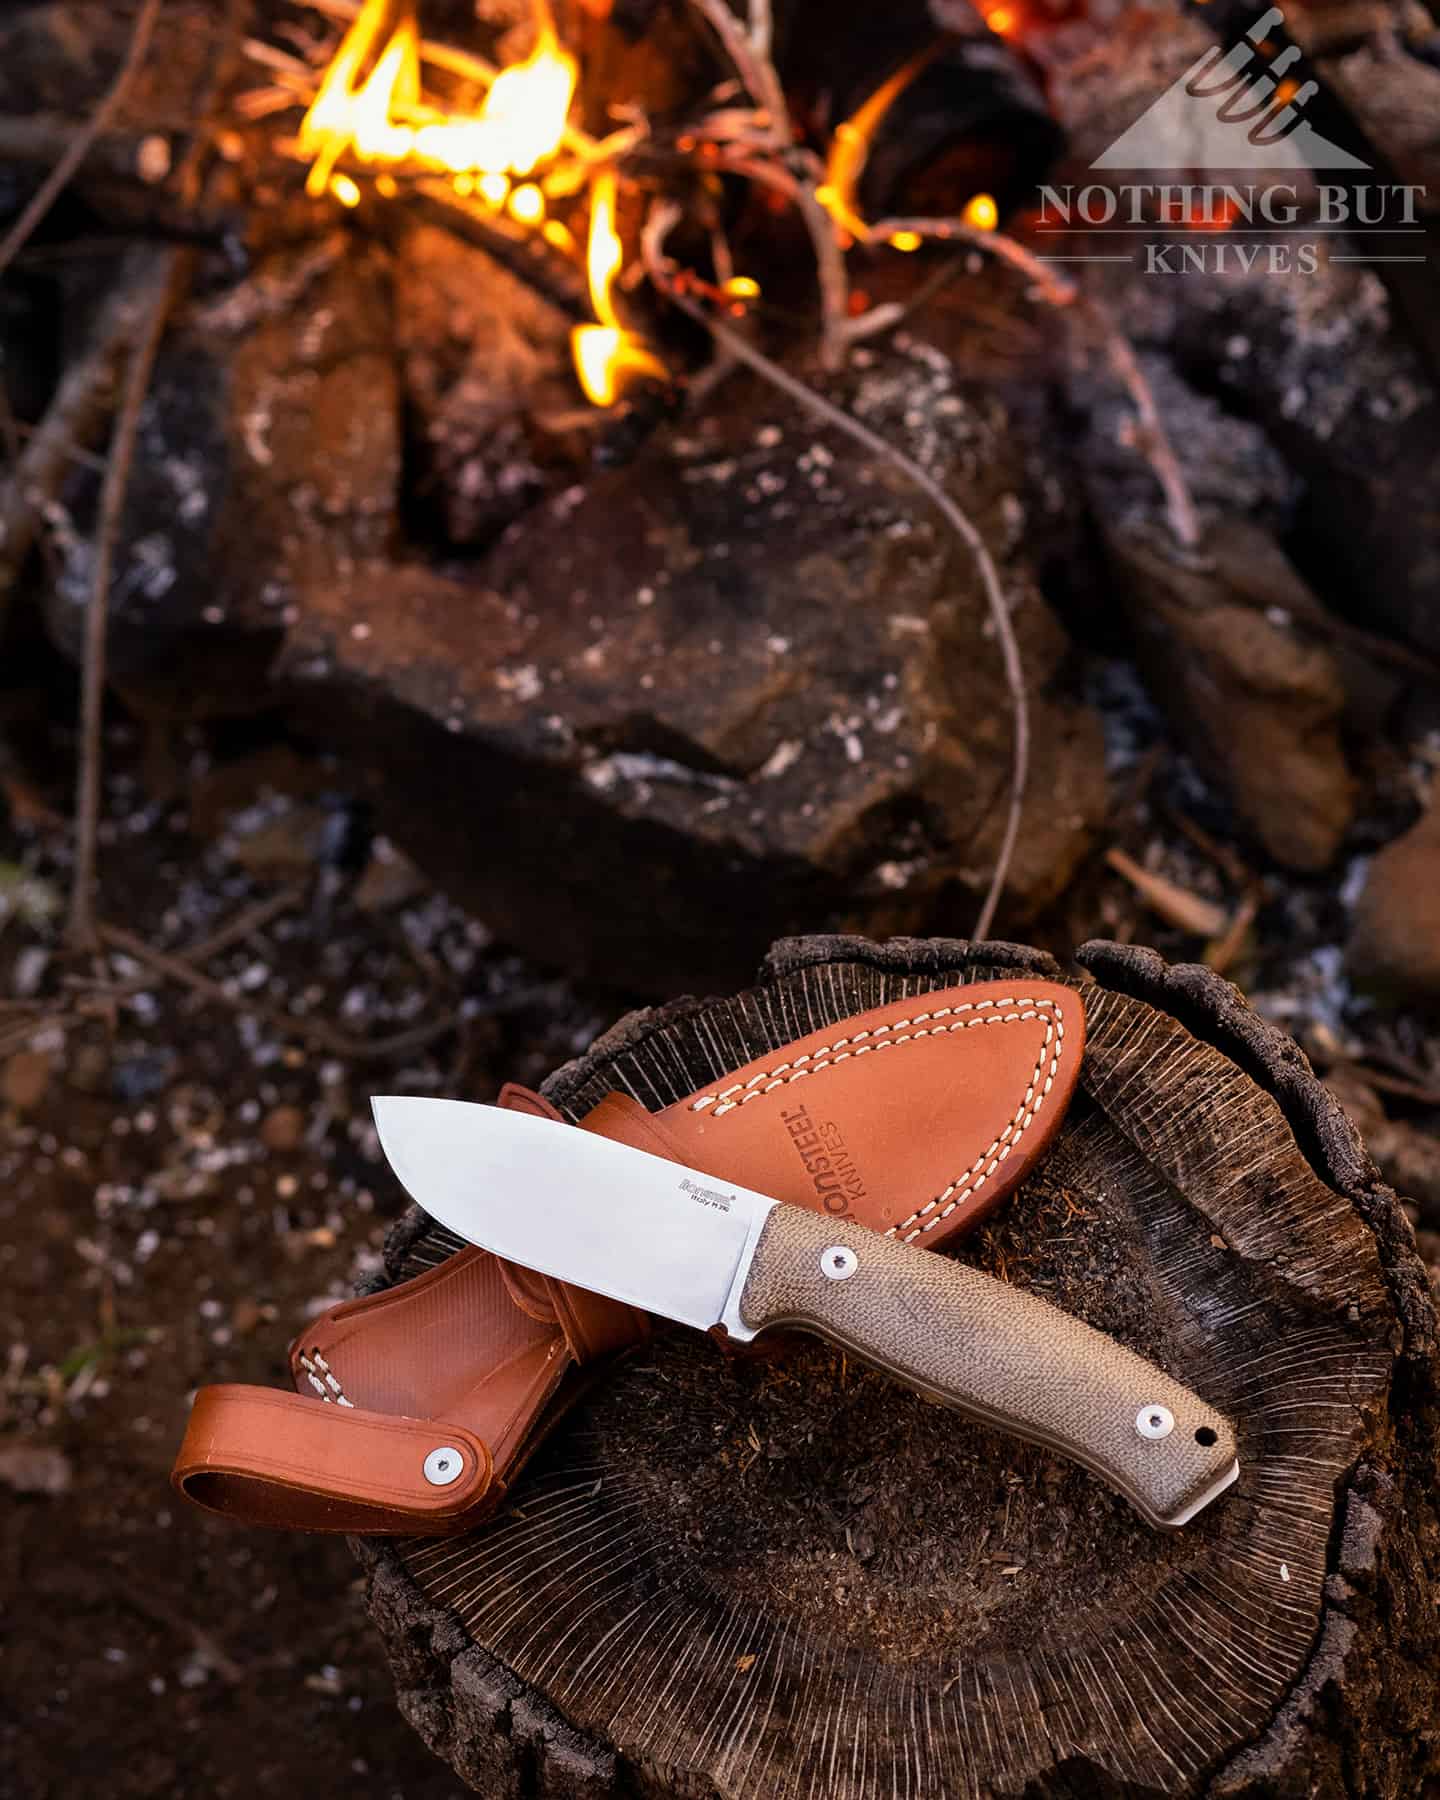 If you are looking for a gift knife for a camper, hunter, fisherman or a combination of the three, the LionSteel M2m is a great choice.